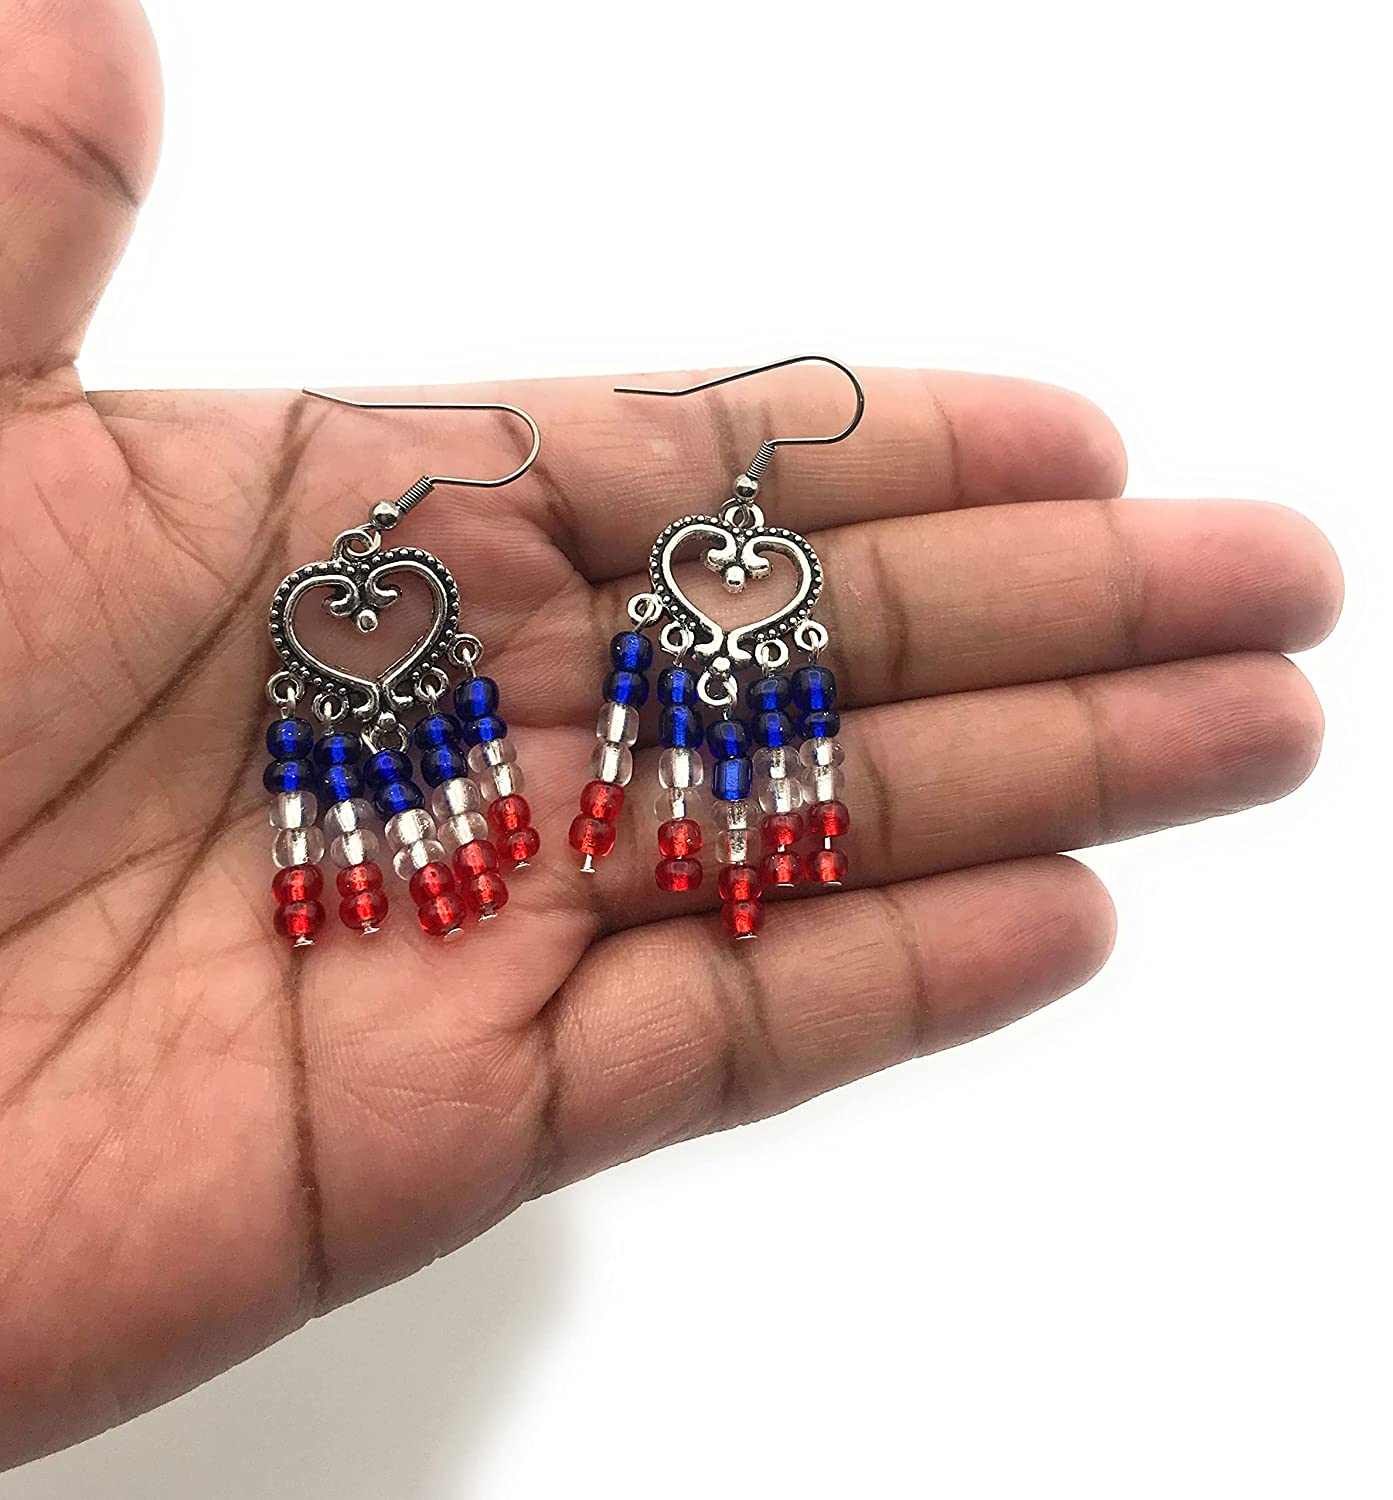 Red White and Blue Earrings In Palm of the Hand from Scott D Jewelry Designs